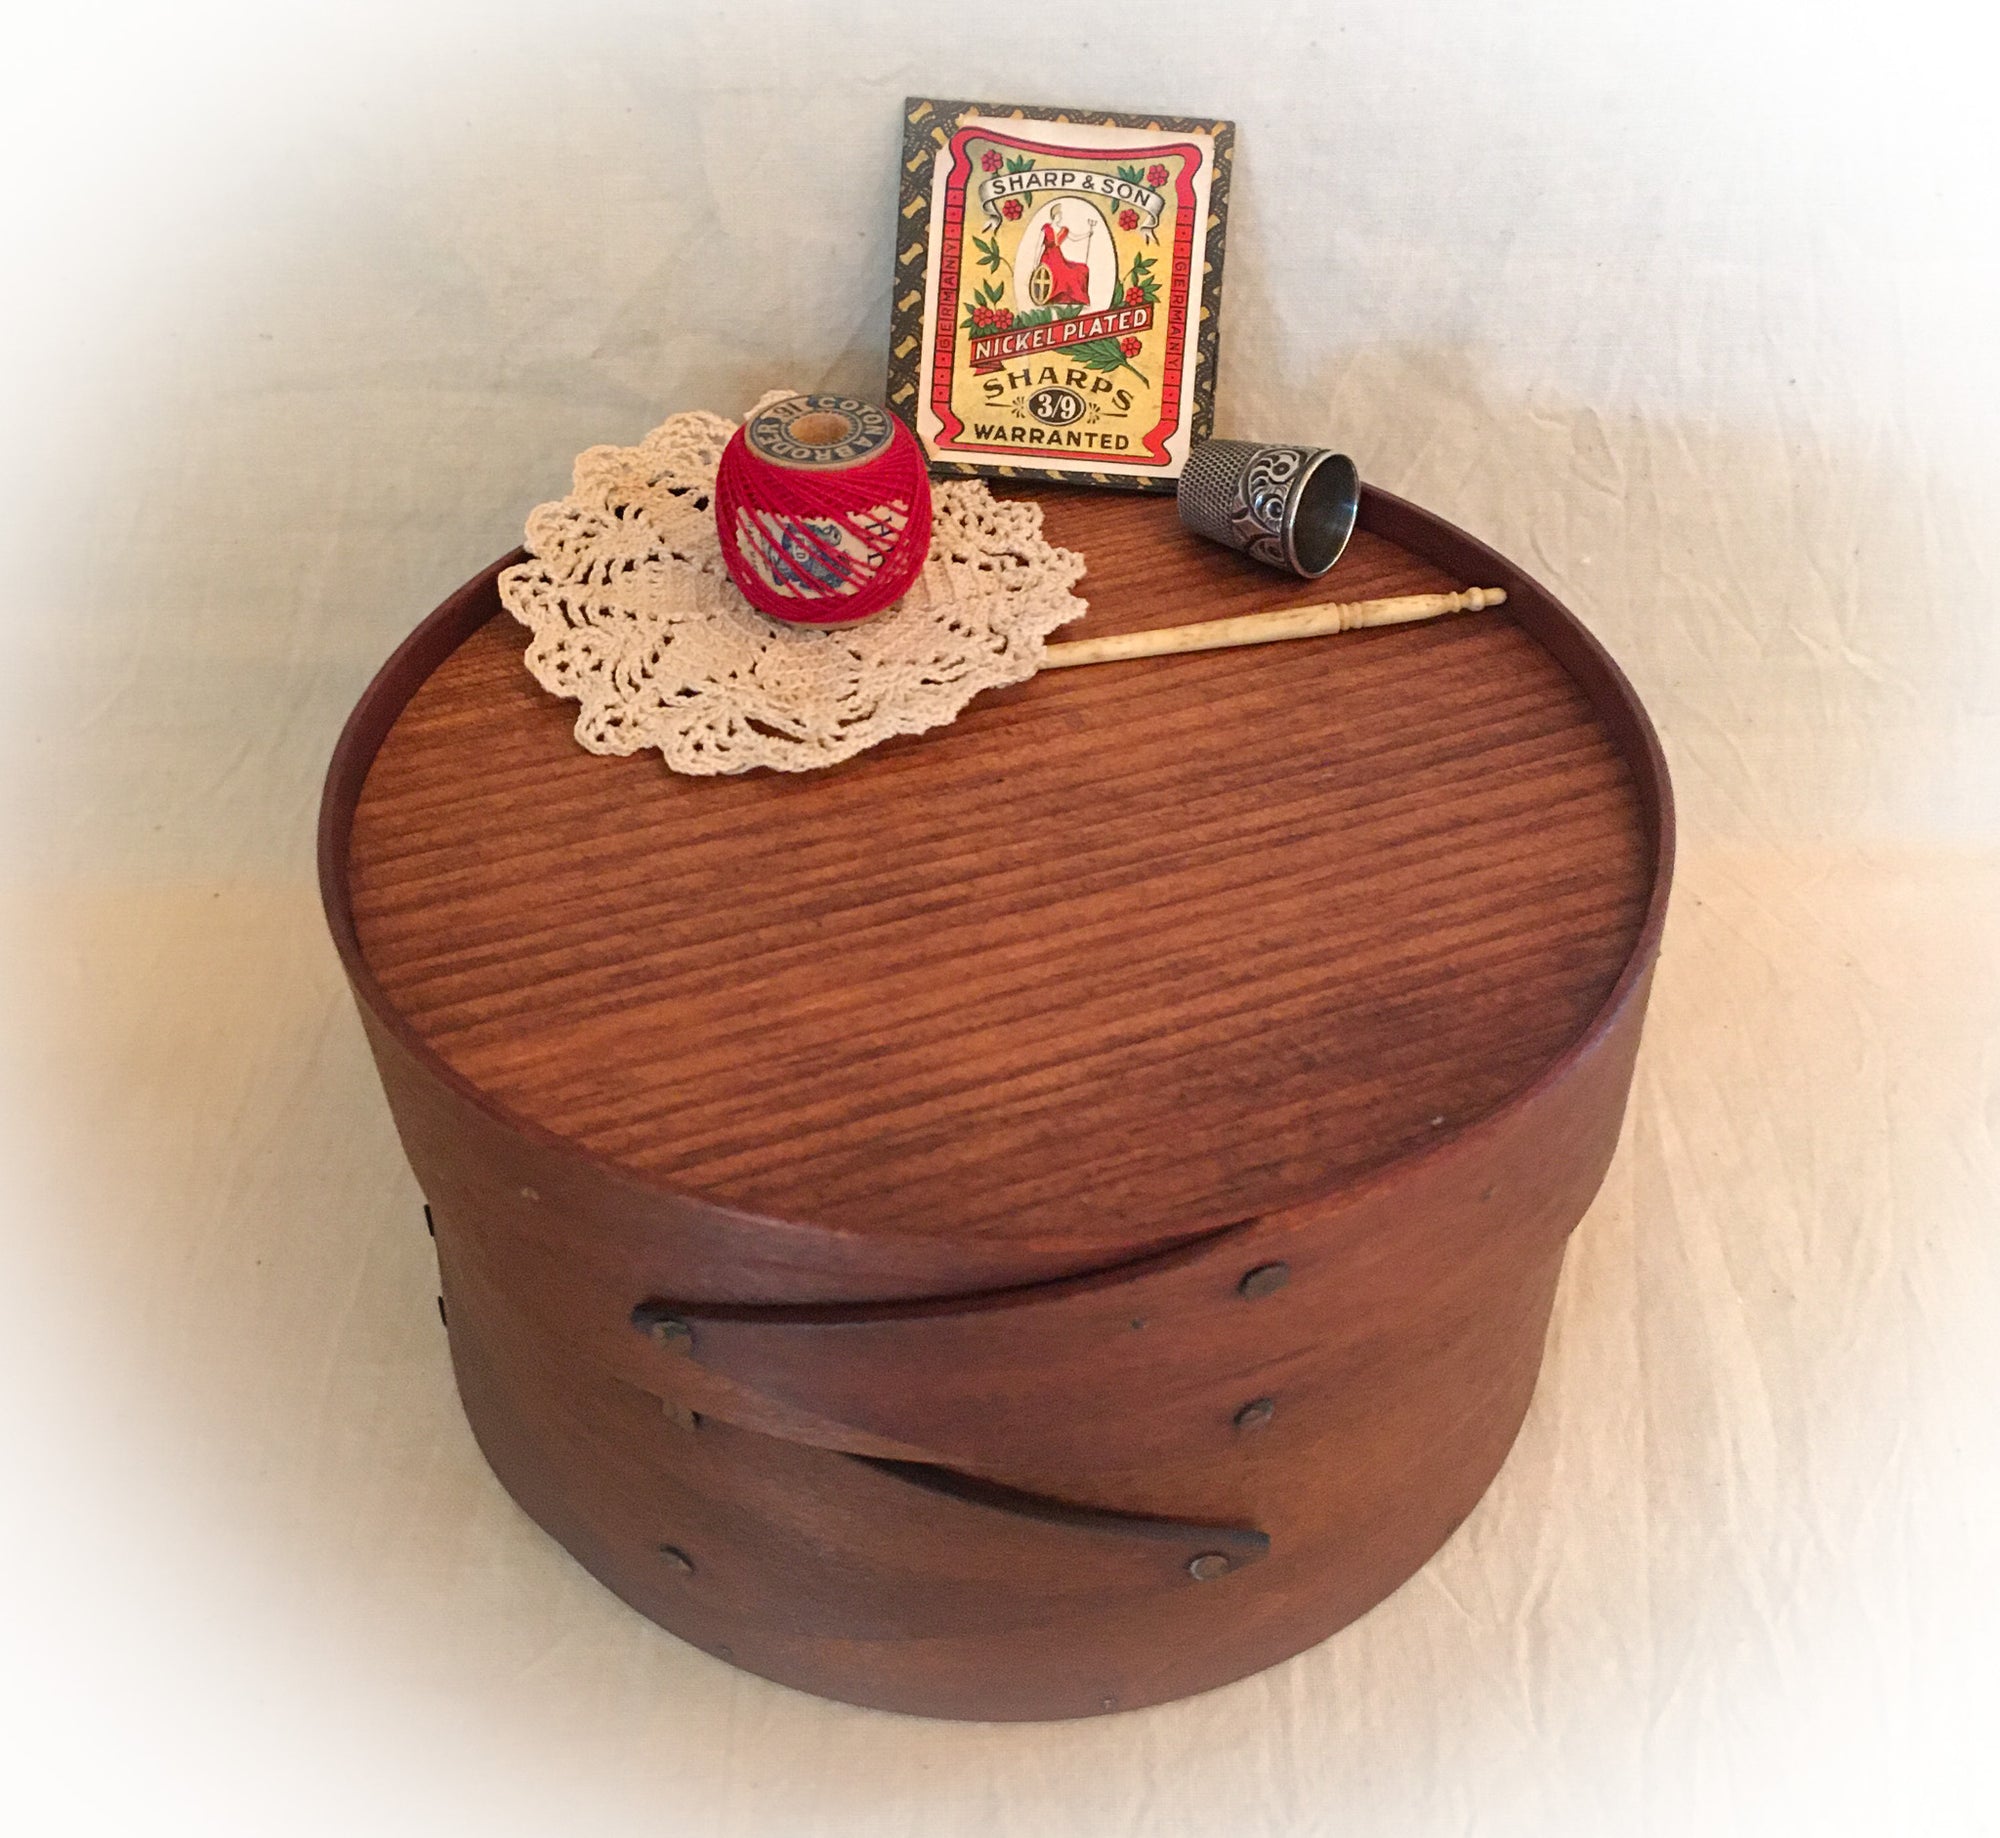 Round Shaker Style Box with Recessed Lid for Needlework, 6 Inch Diameter, LeHays Shaker Boxes, Holding Items